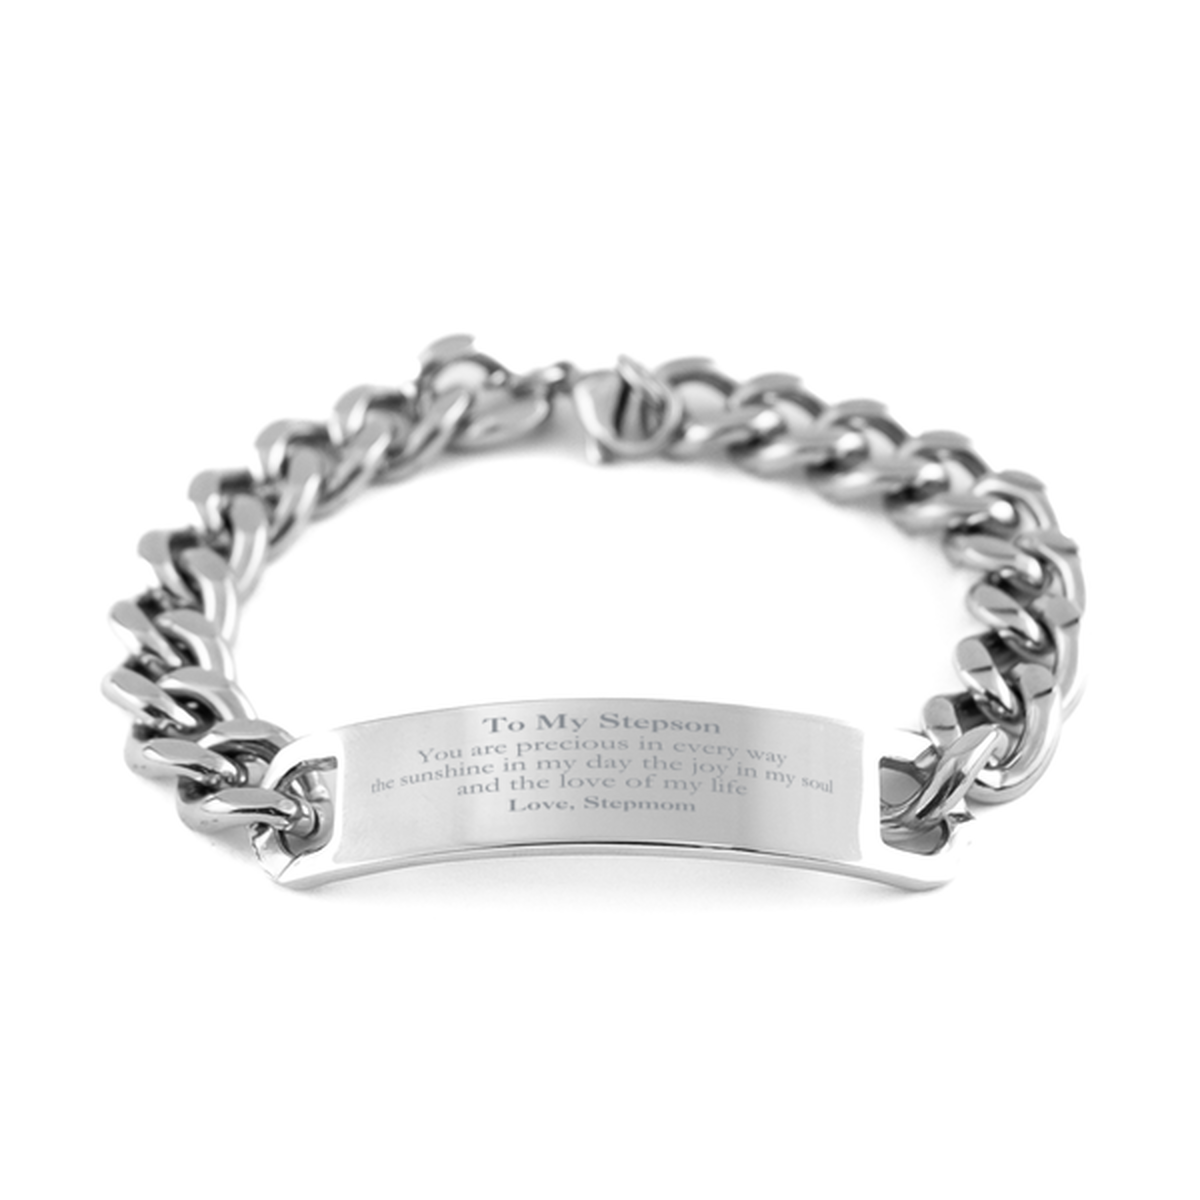 Graduation Gifts for Stepson Cuban Chain Stainless Steel Bracelet Present from Stepmom, Christmas Stepson Birthday Gifts Stepson You are precious in every way the sunshine in my day. Love, Stepmom